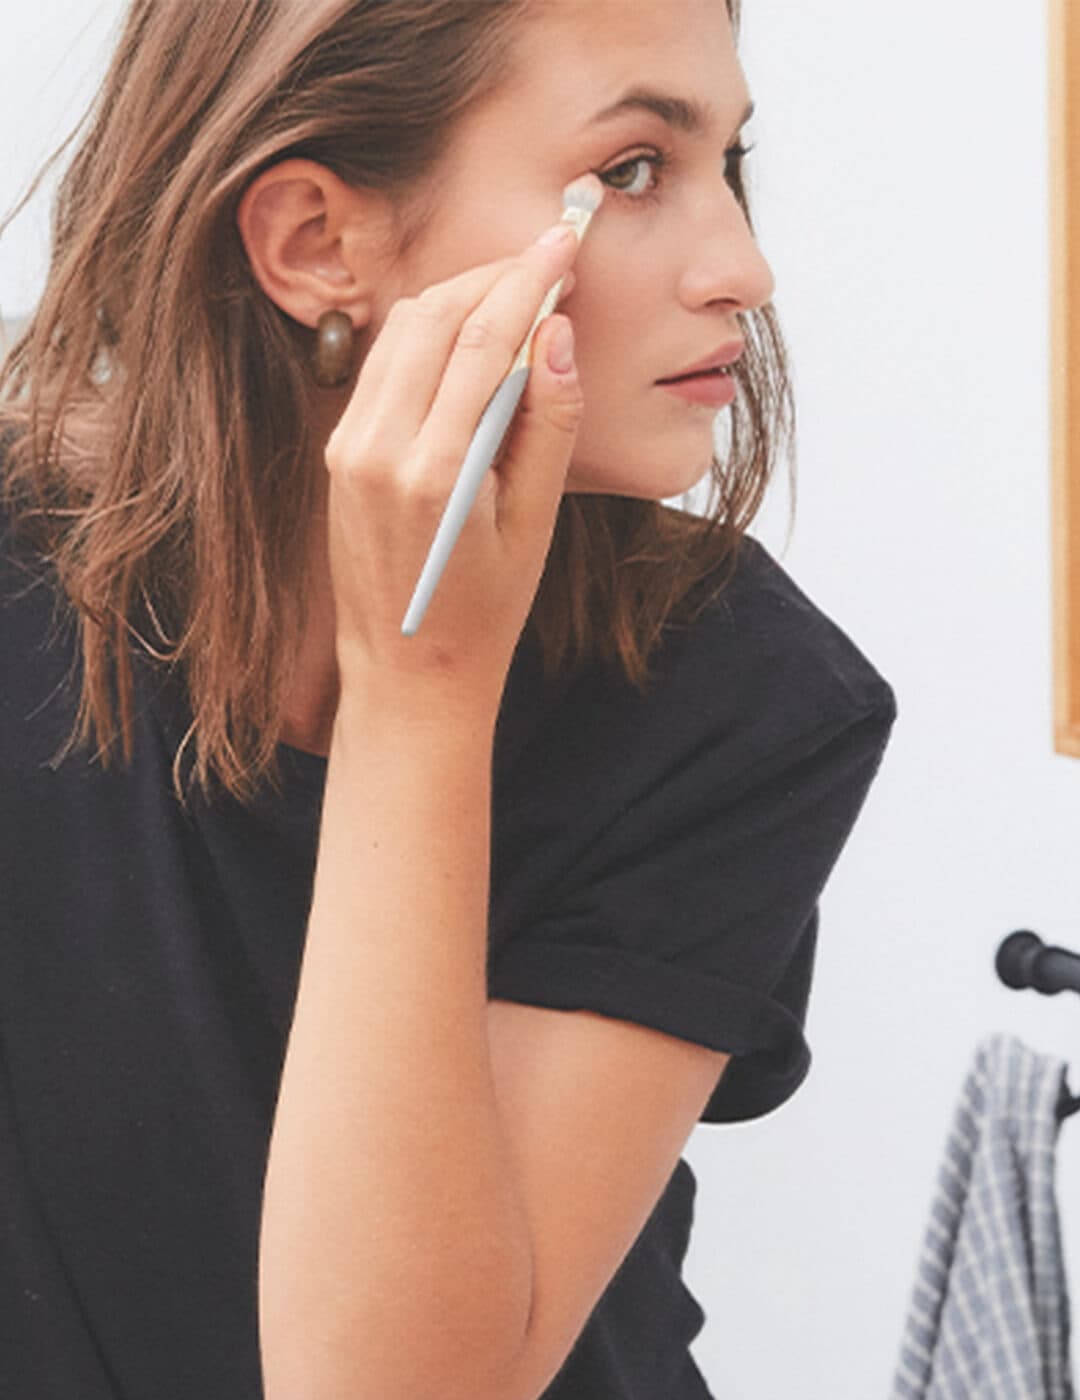 An image of a woman looking at the mirror while applying cosmetics in her eye area